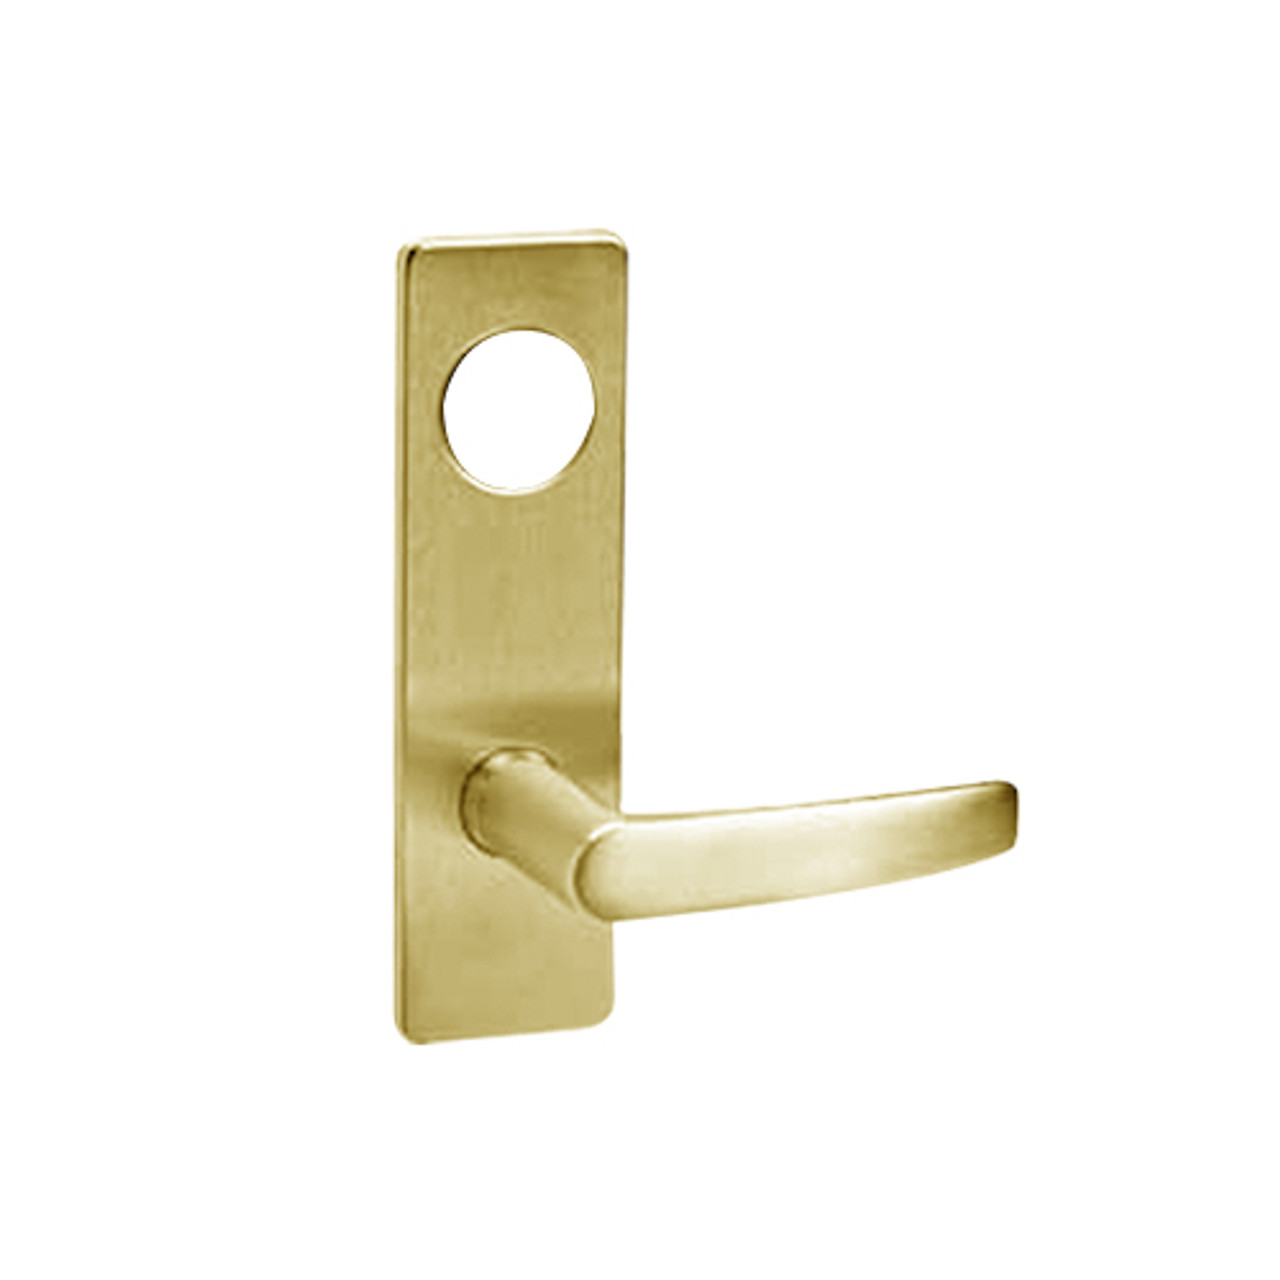 ML2055-ASN-605 Corbin Russwin ML2000 Series Mortise Classroom Locksets with Armstrong Lever in Bright Brass